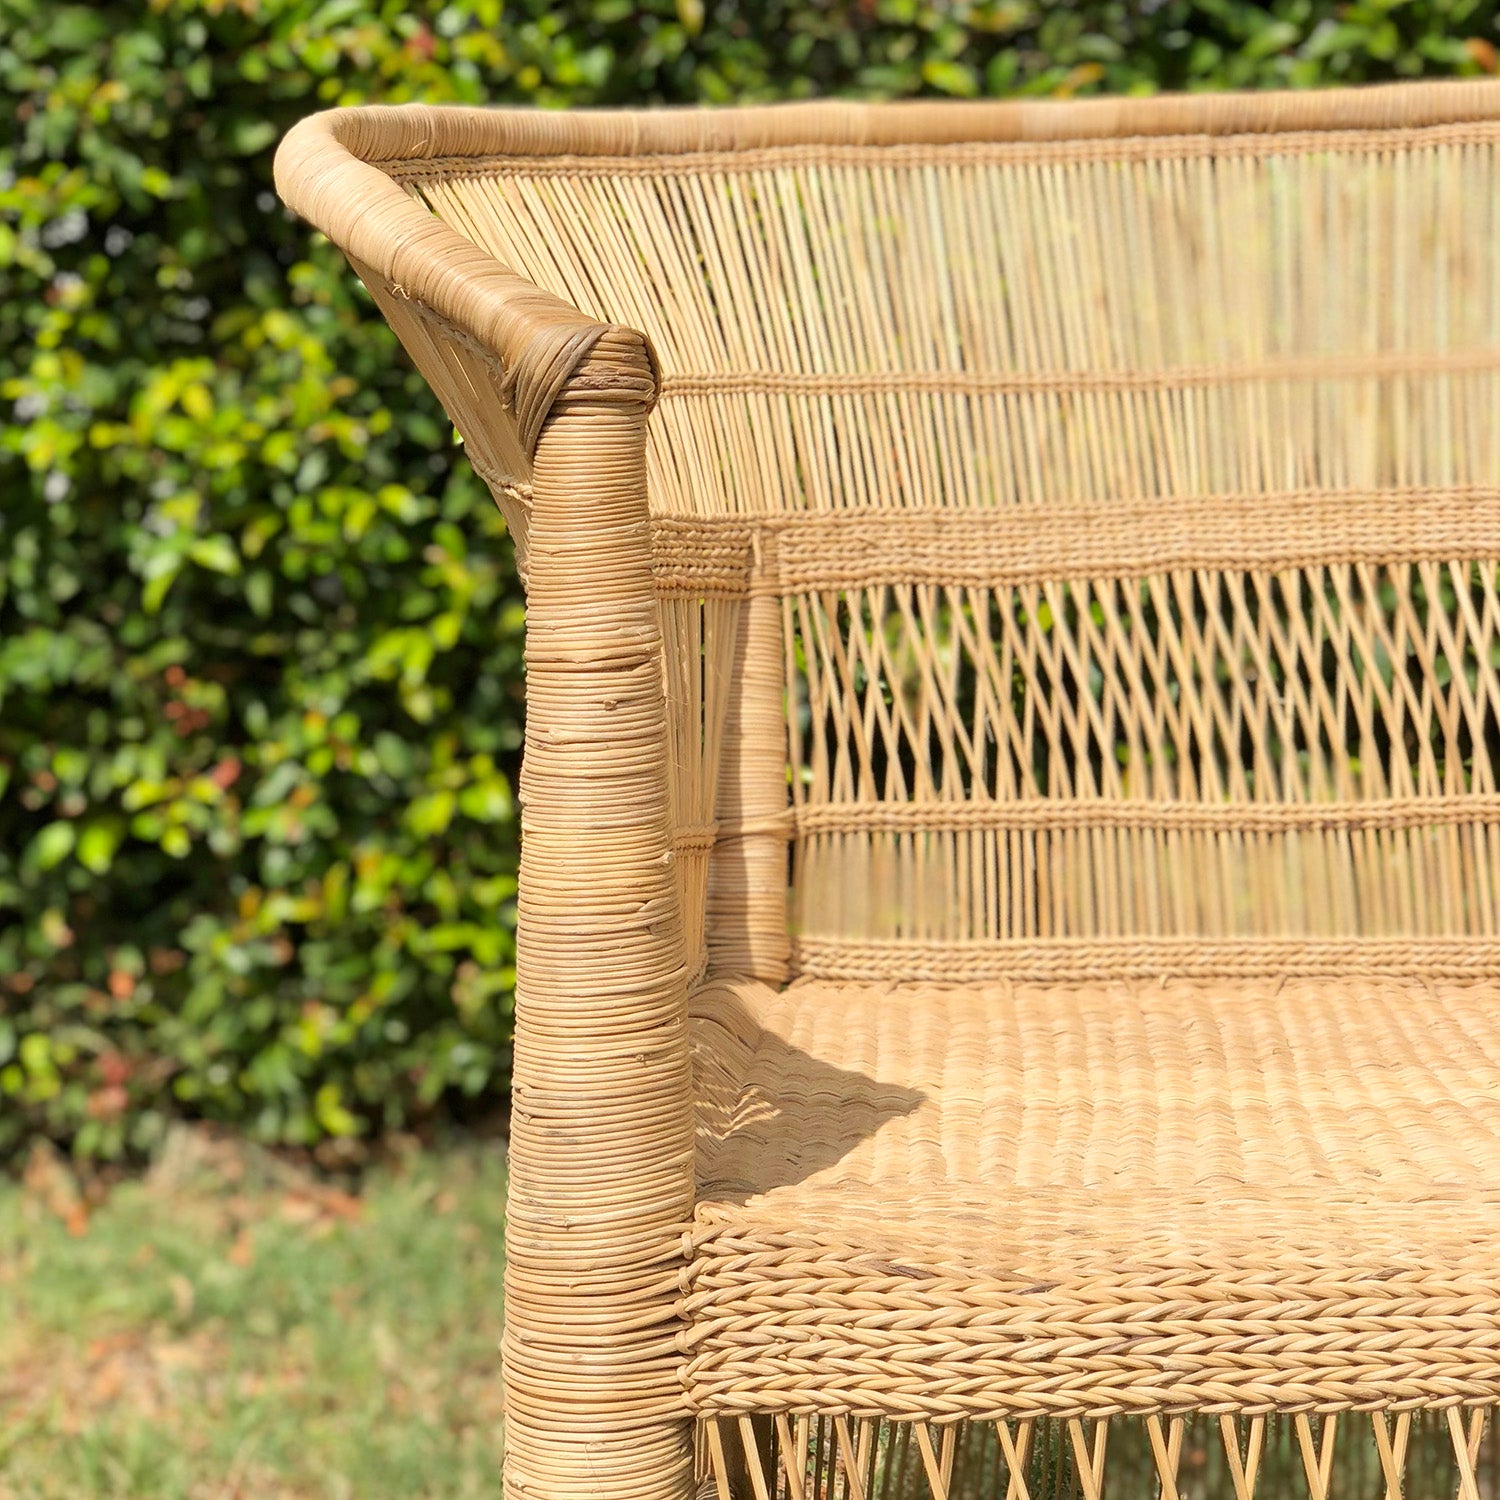 Traditional Malawi Cane Chair Furniture Chairs Rattan Weaved Wicker